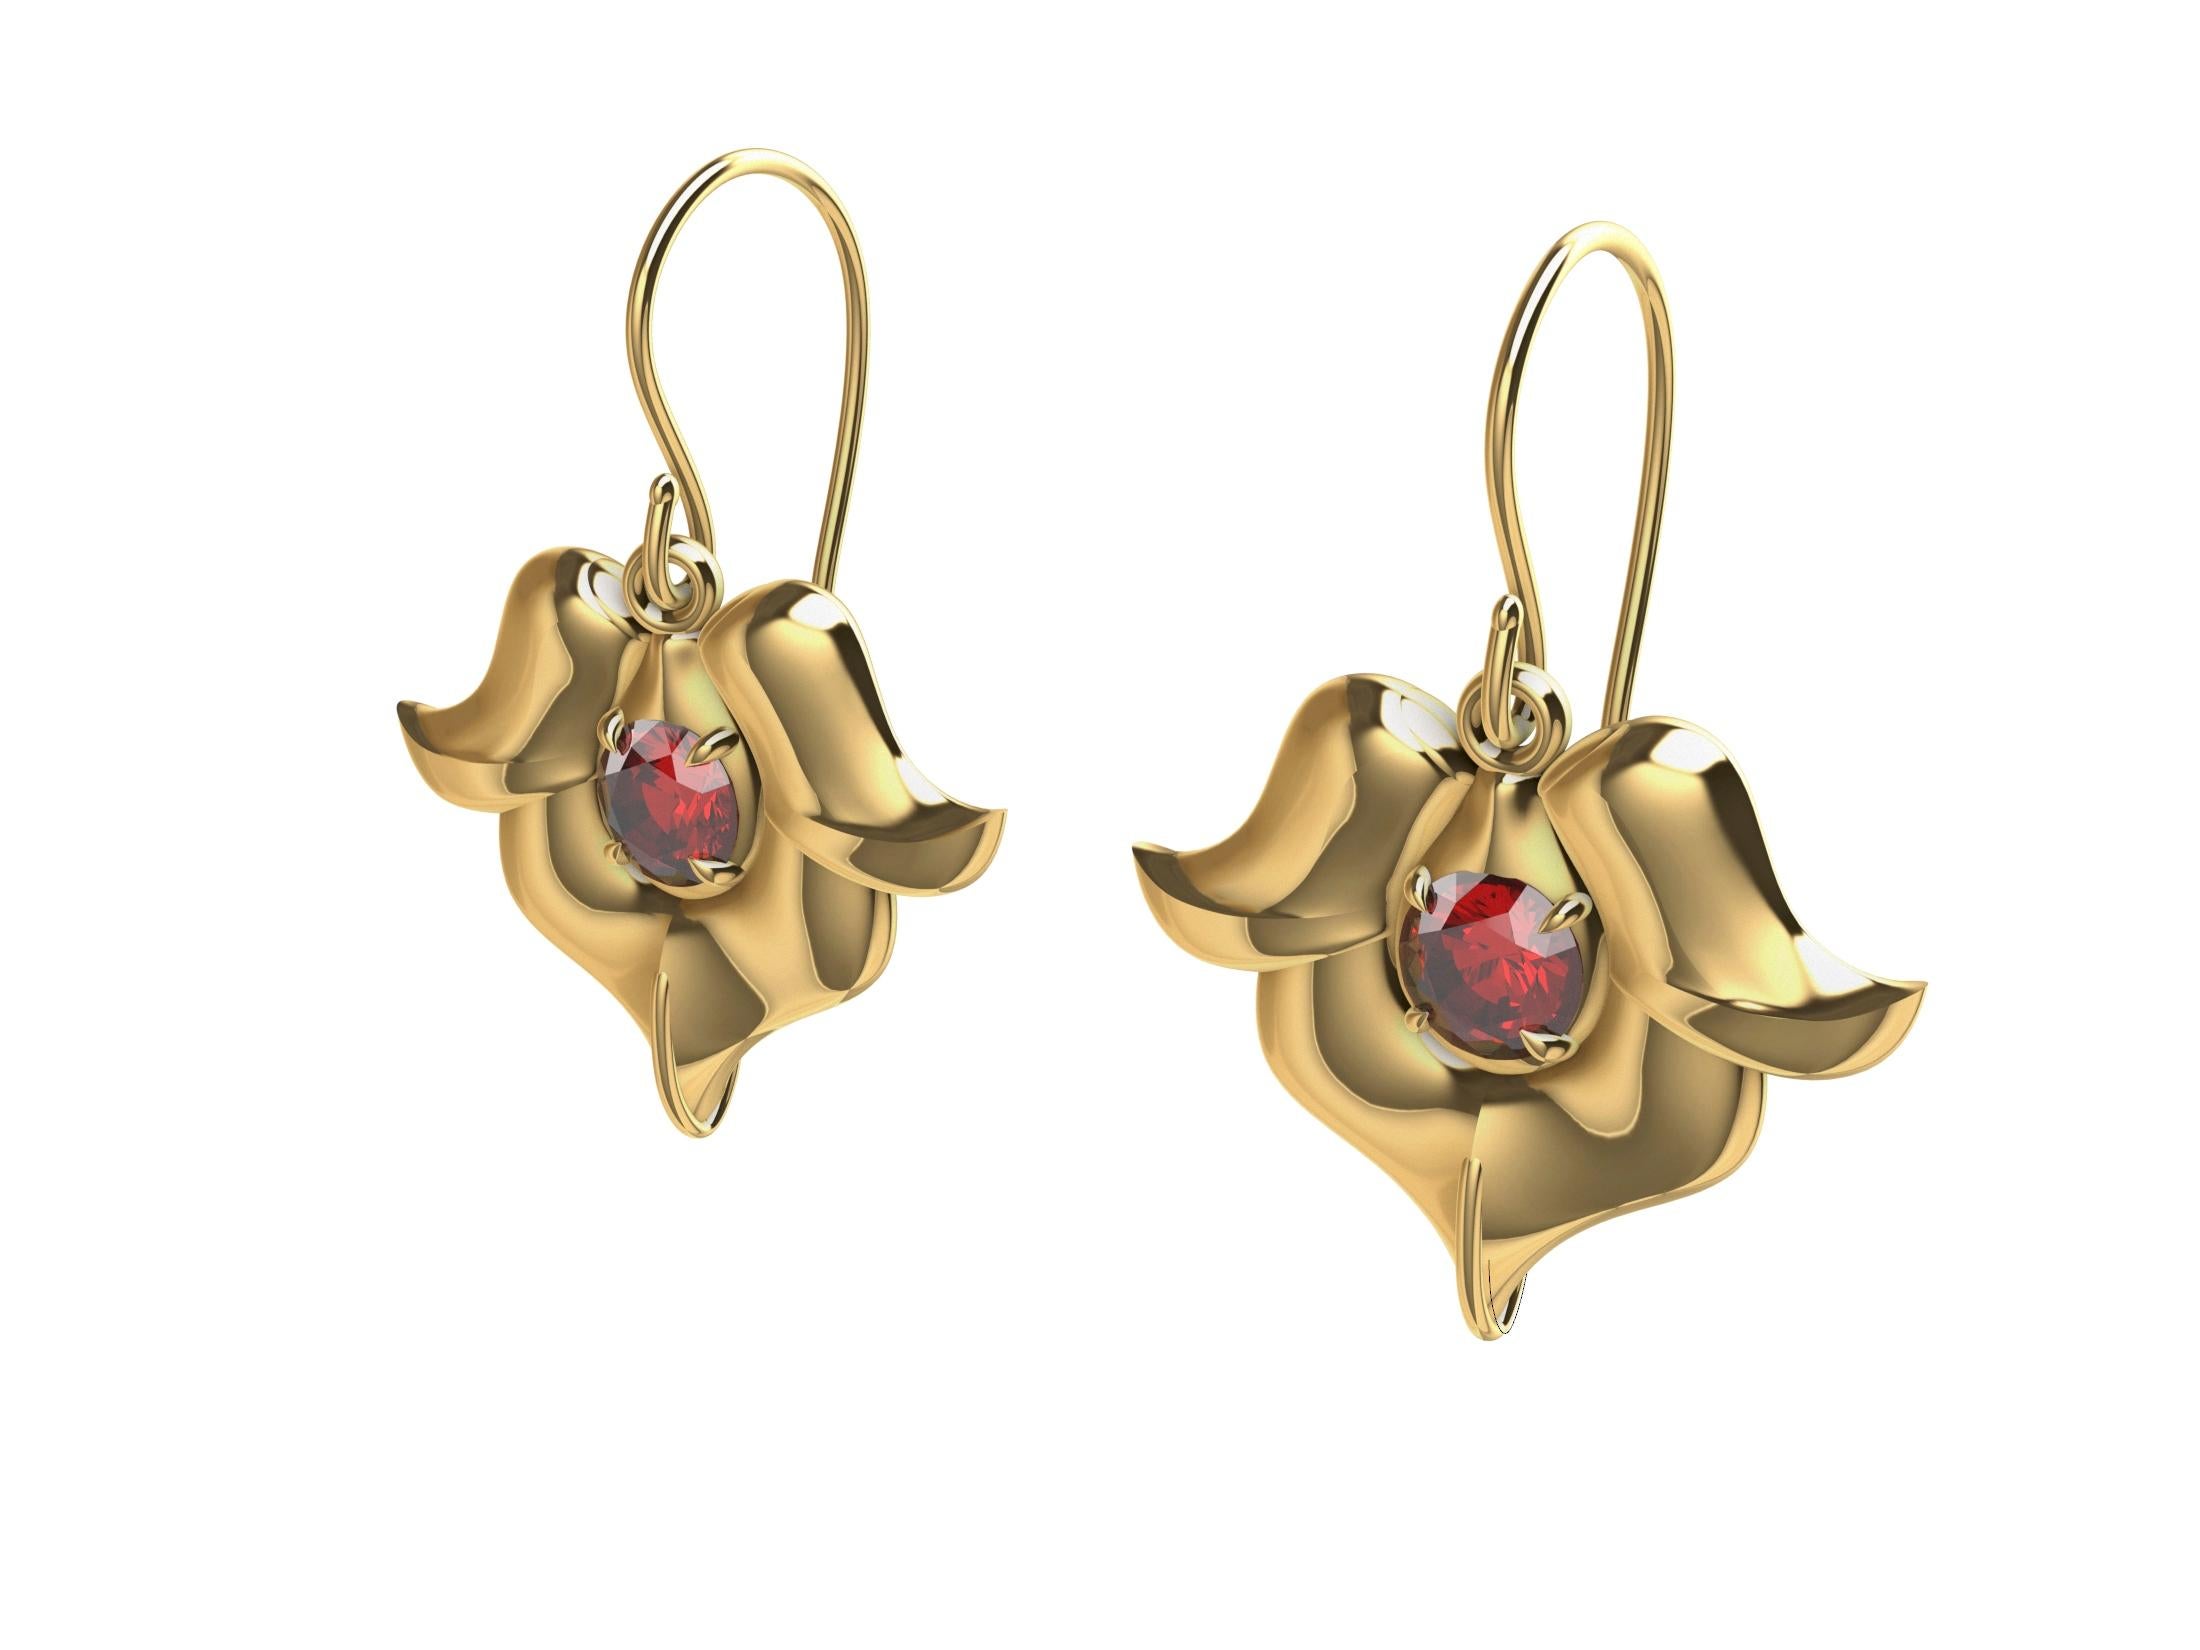 18 Karat Yellow Ruby Arabesque Flower Earrings, These came from ornamental ironwork inspiration with my love of arabesque curves, and flower studies. Years of photographing flowers for their sculptural influences. and inspiration.  The rubies are